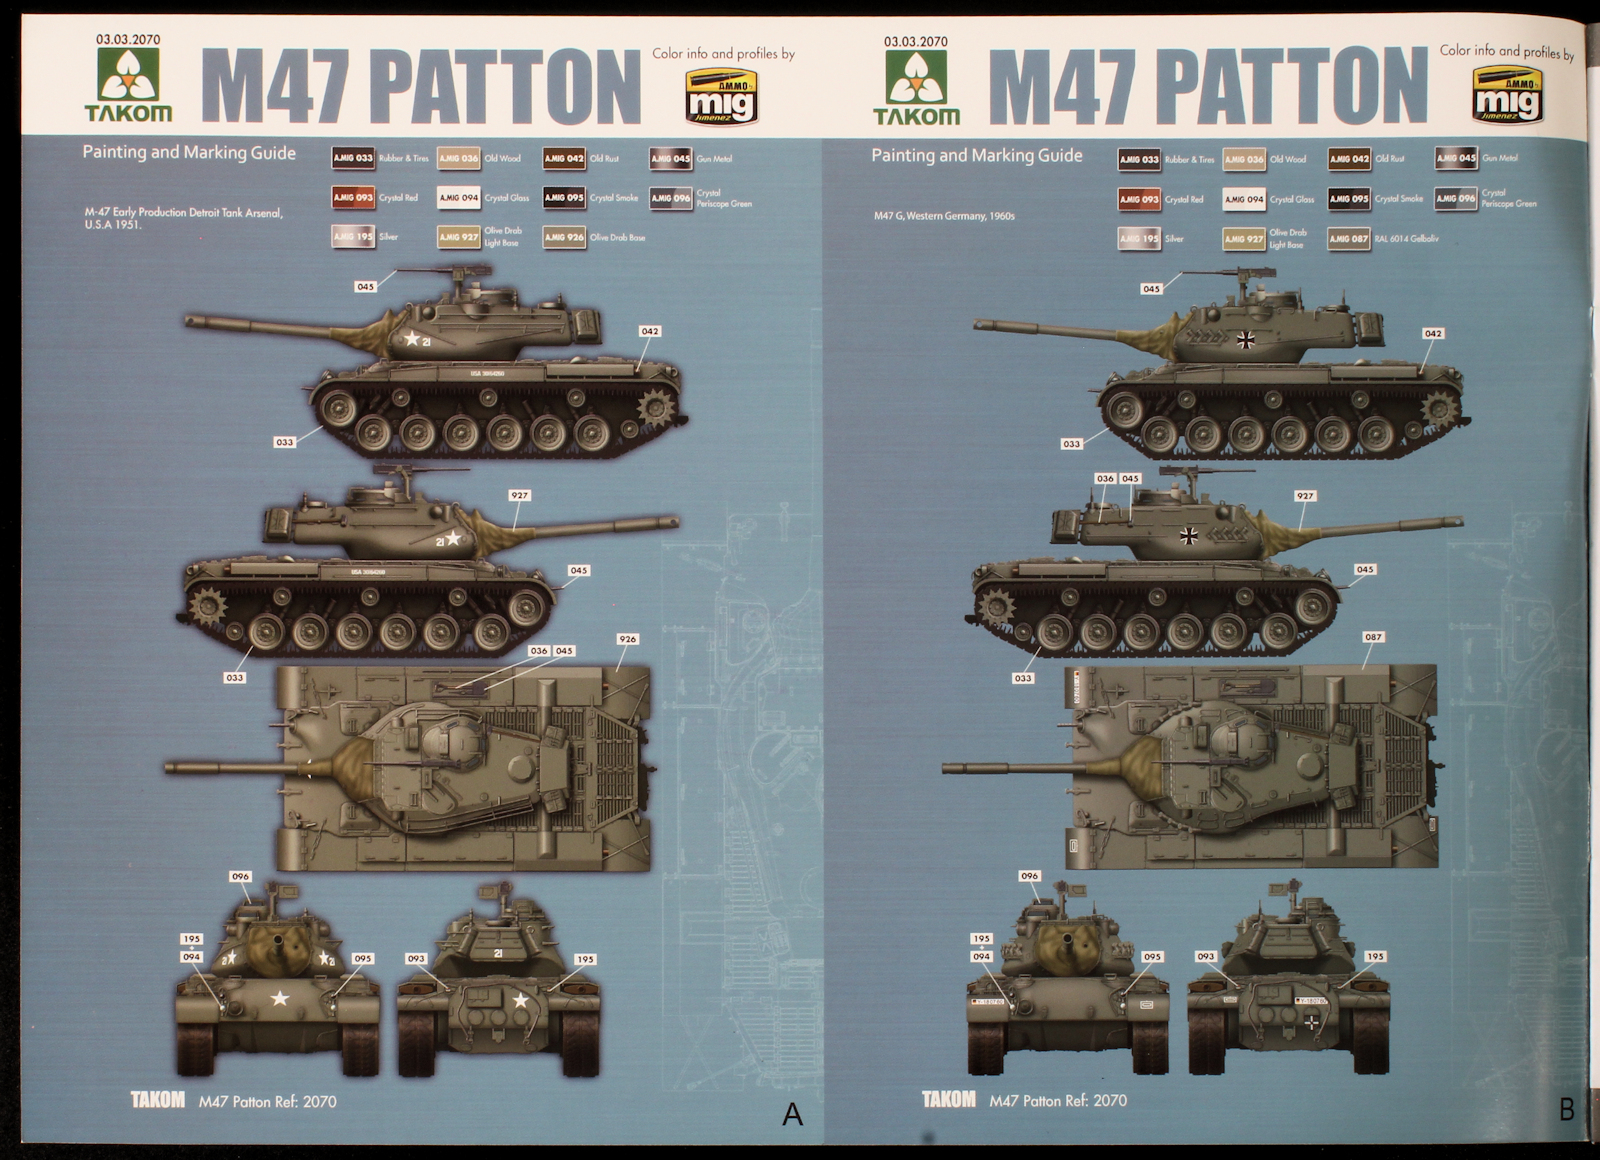 The Modelling News: In-Boxed: the new 35th scale M47 Patton from Takom